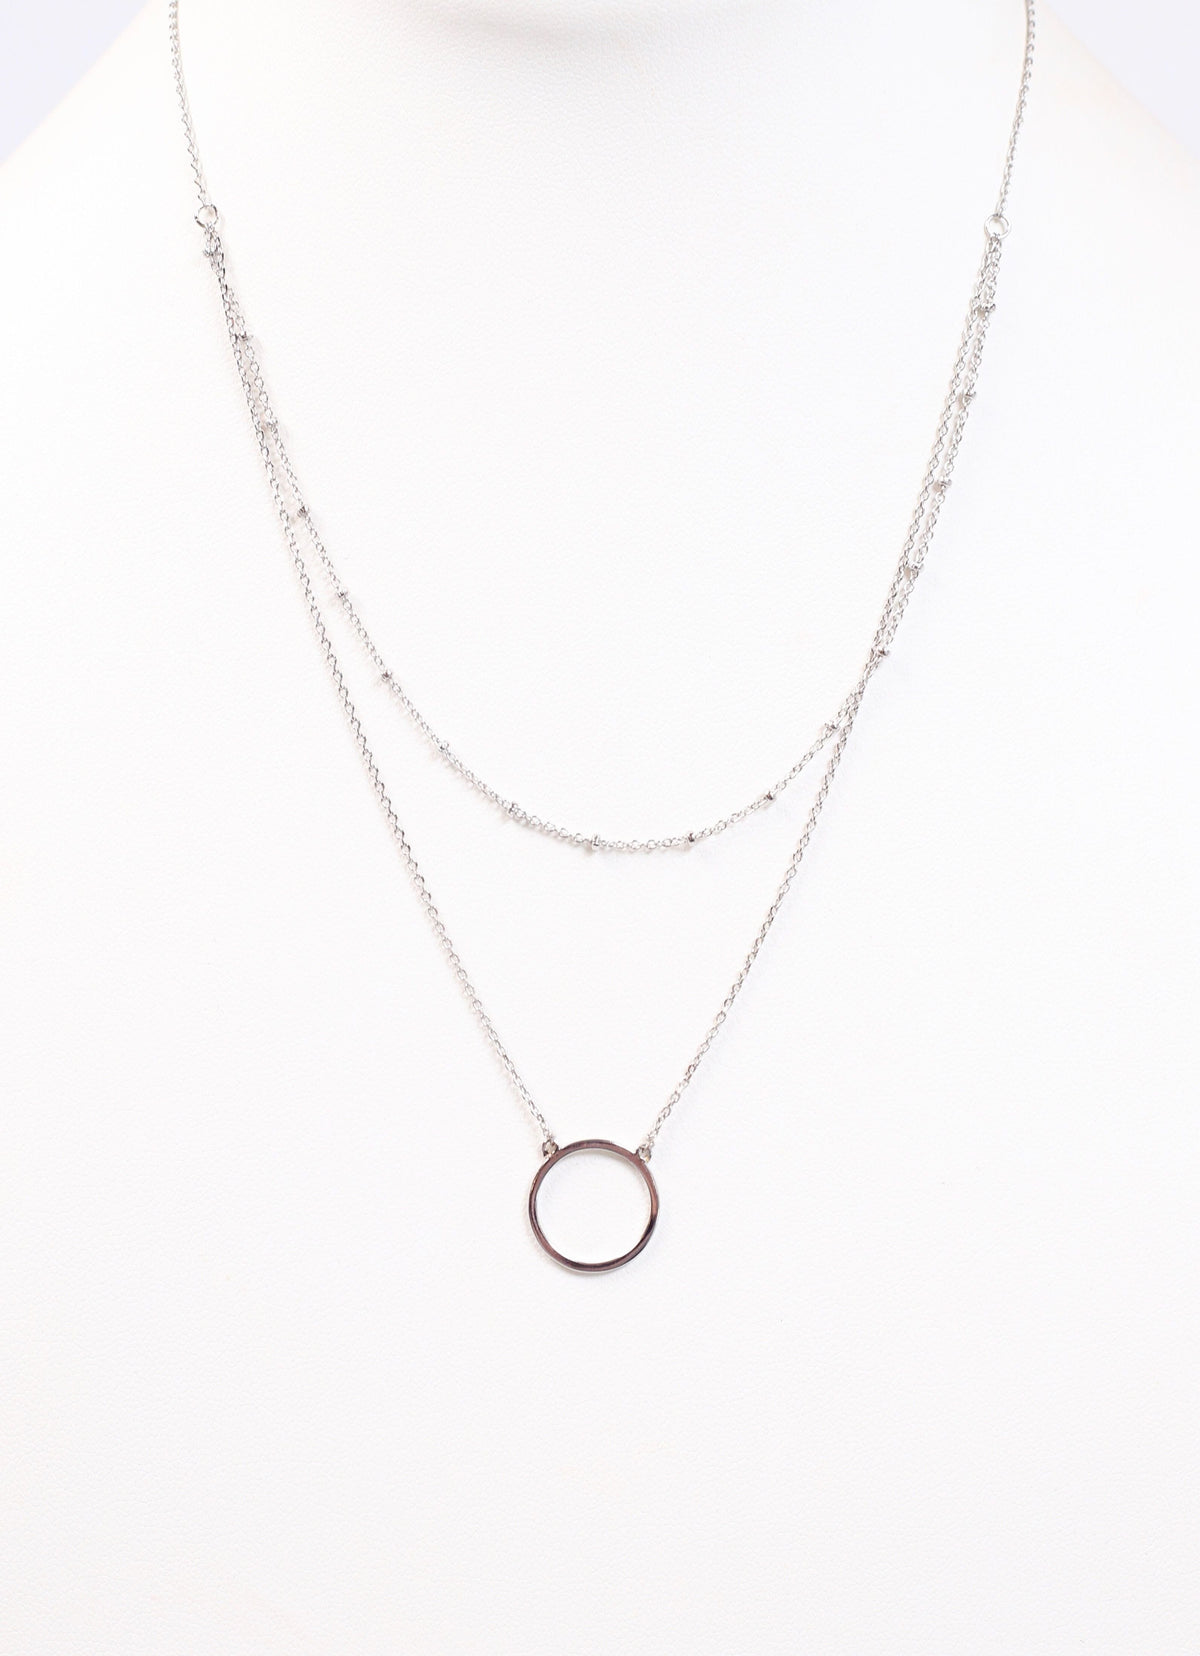 Sweet Moment Layered Necklace SILVER - Caroline Hill